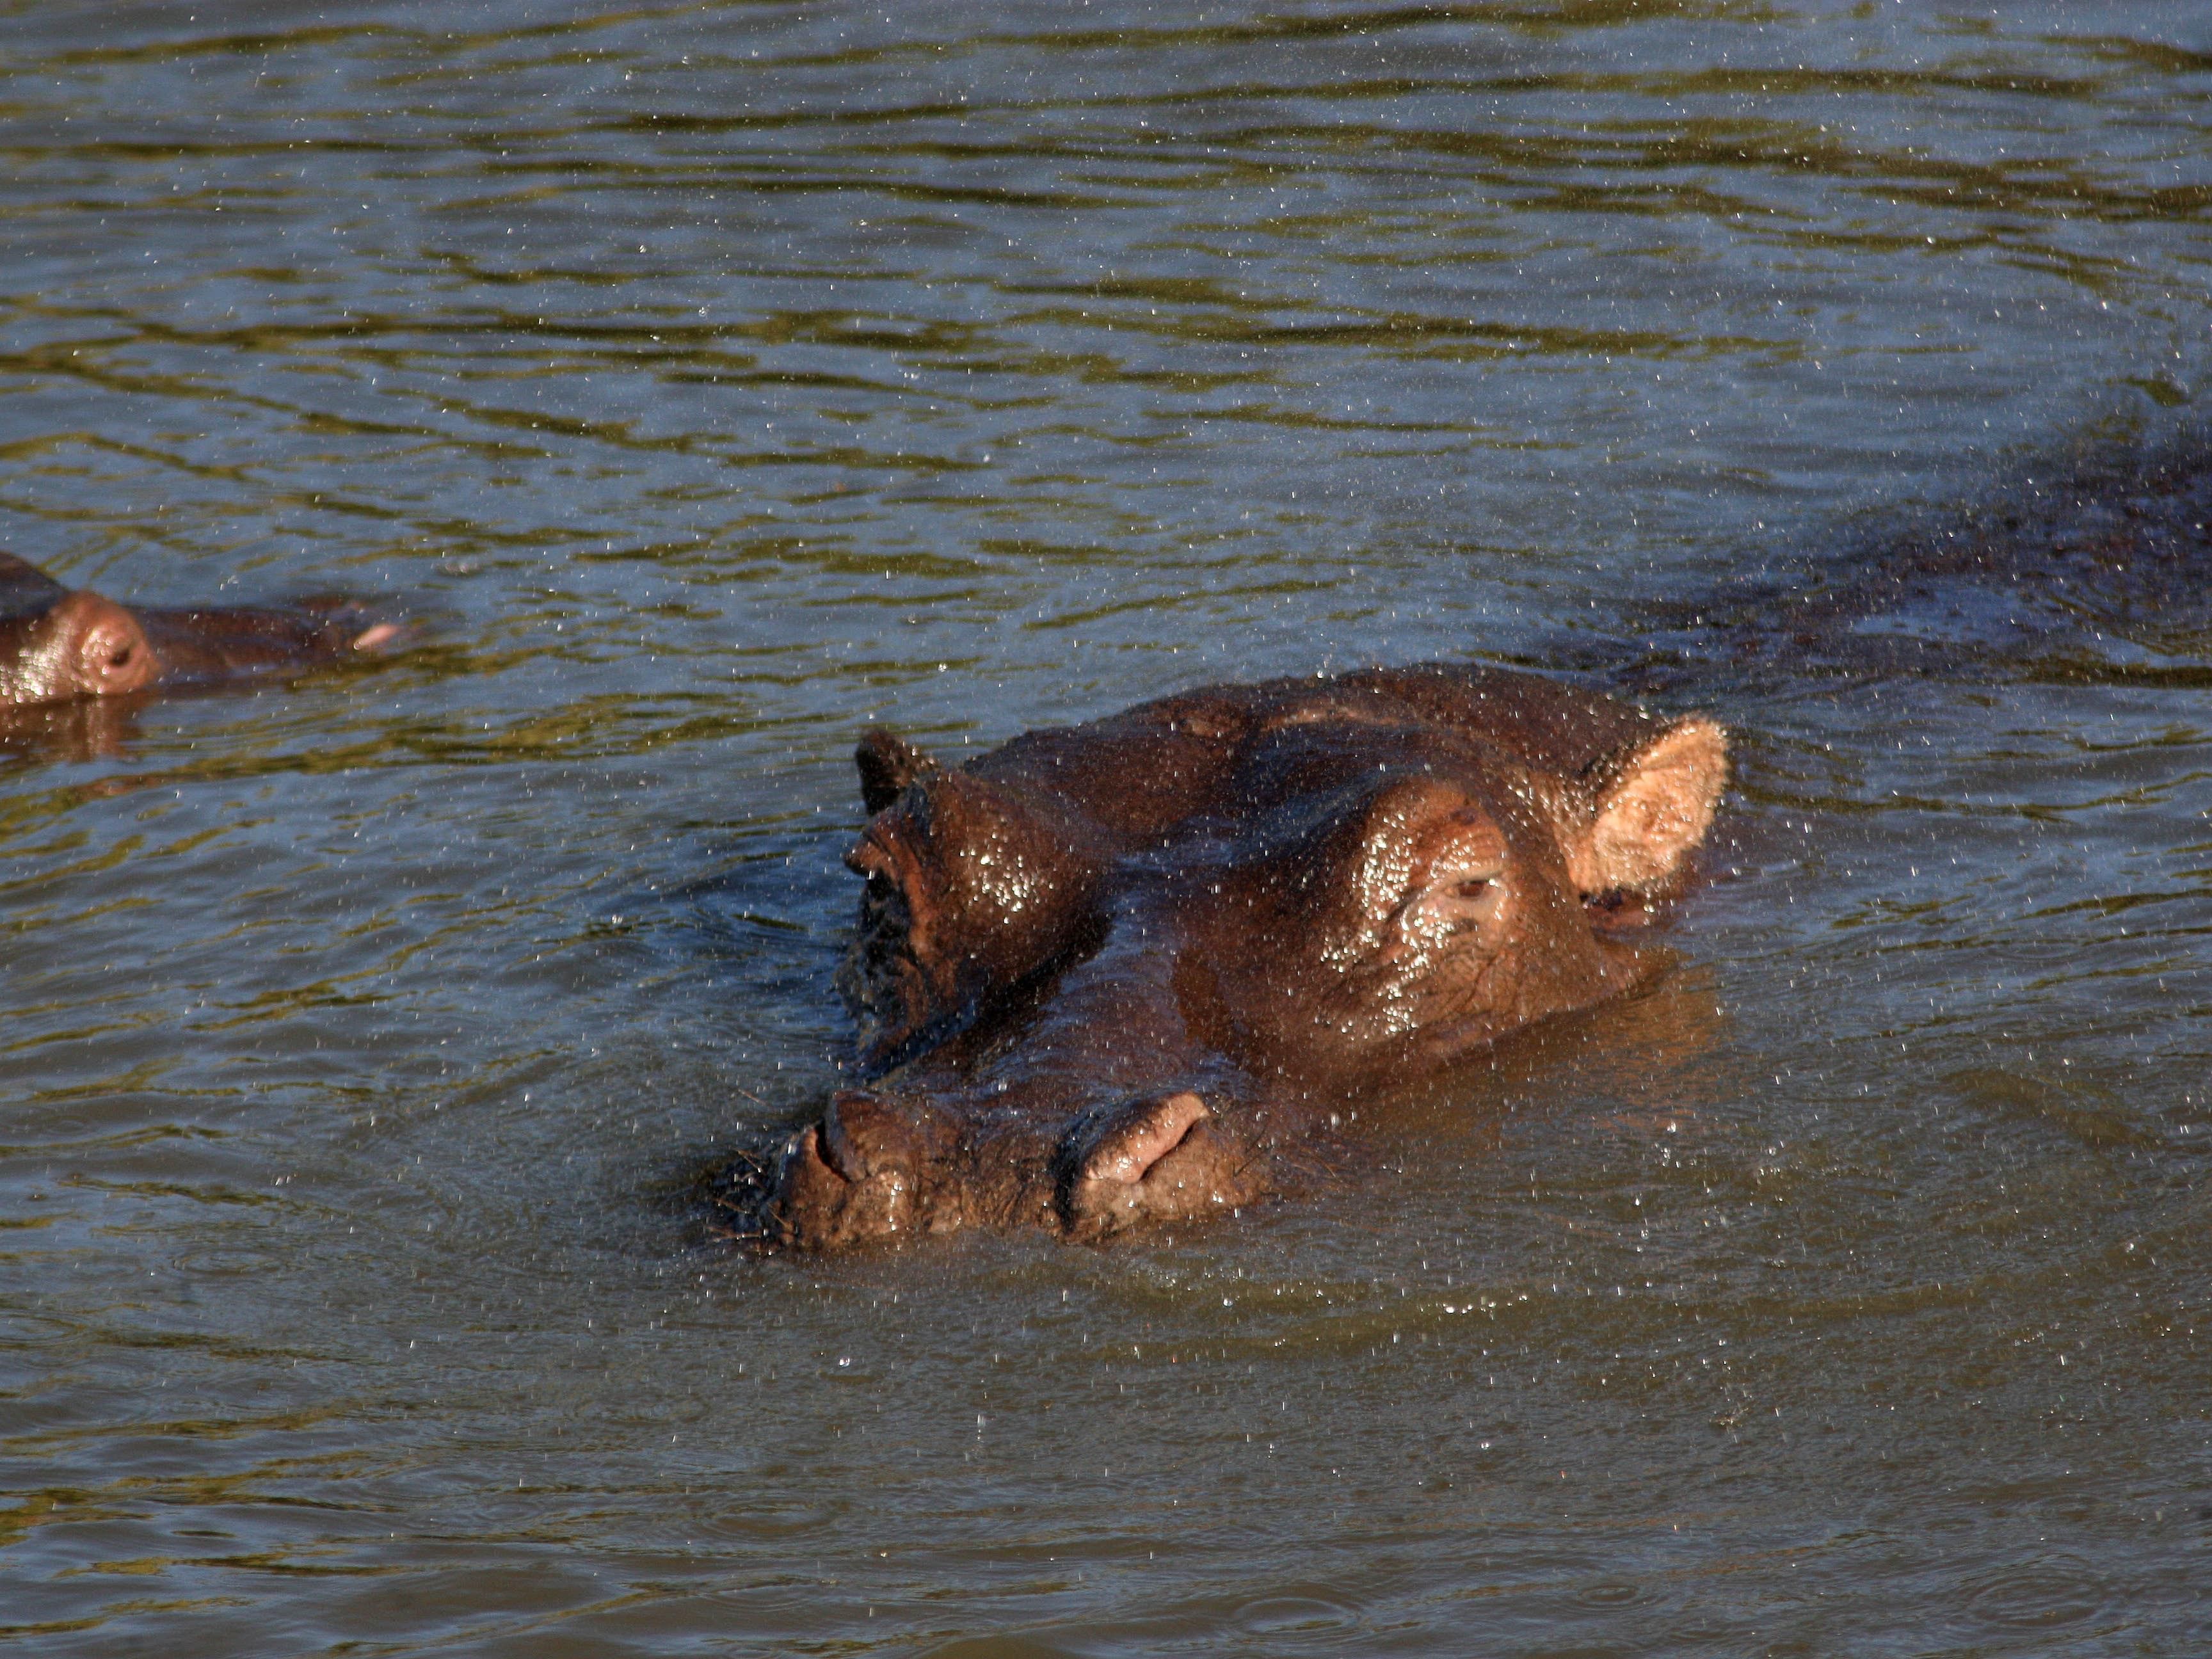 Trotting hippos can become airborne, scientists say